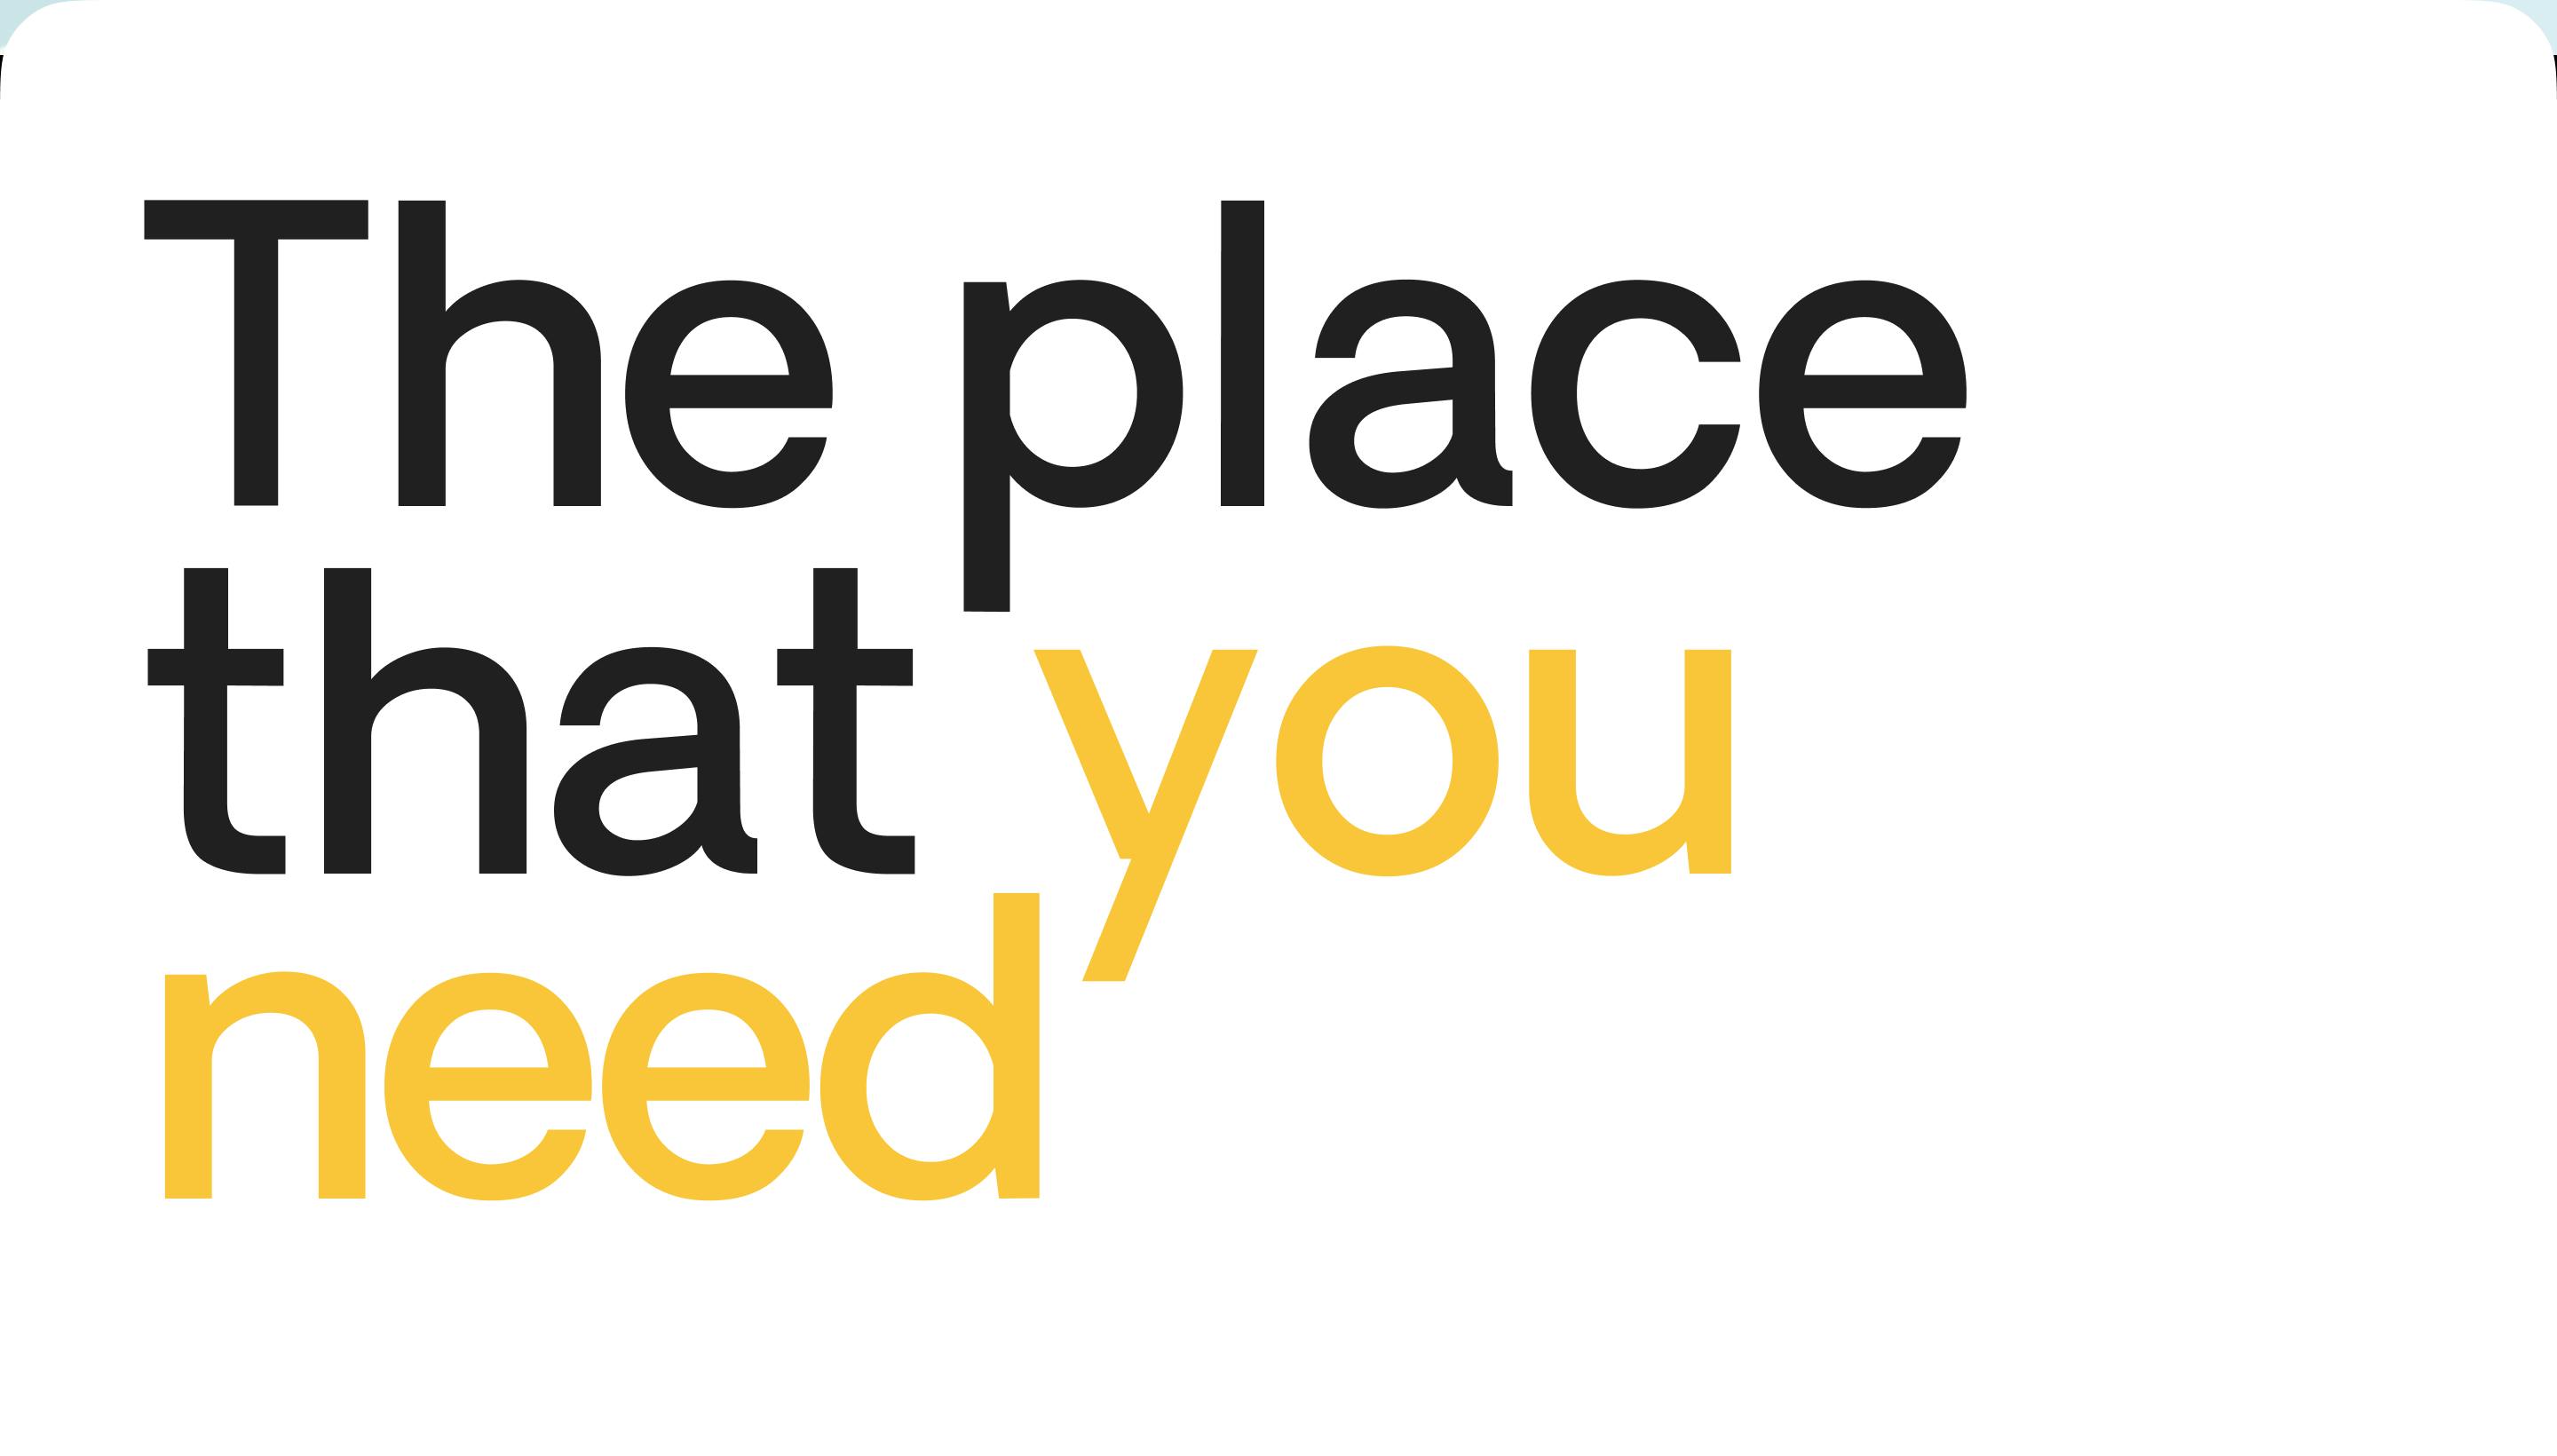 The place that you need